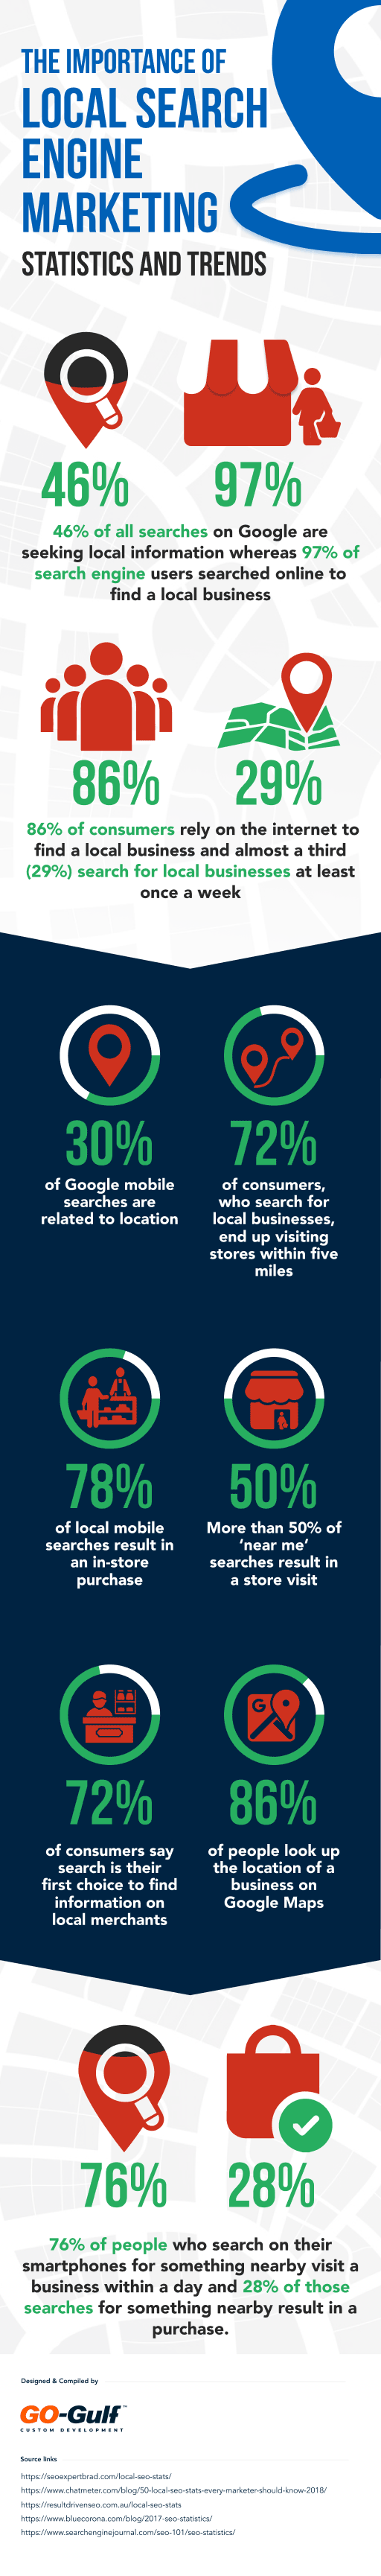 Local Search Engine Marketing Statistics and Trends